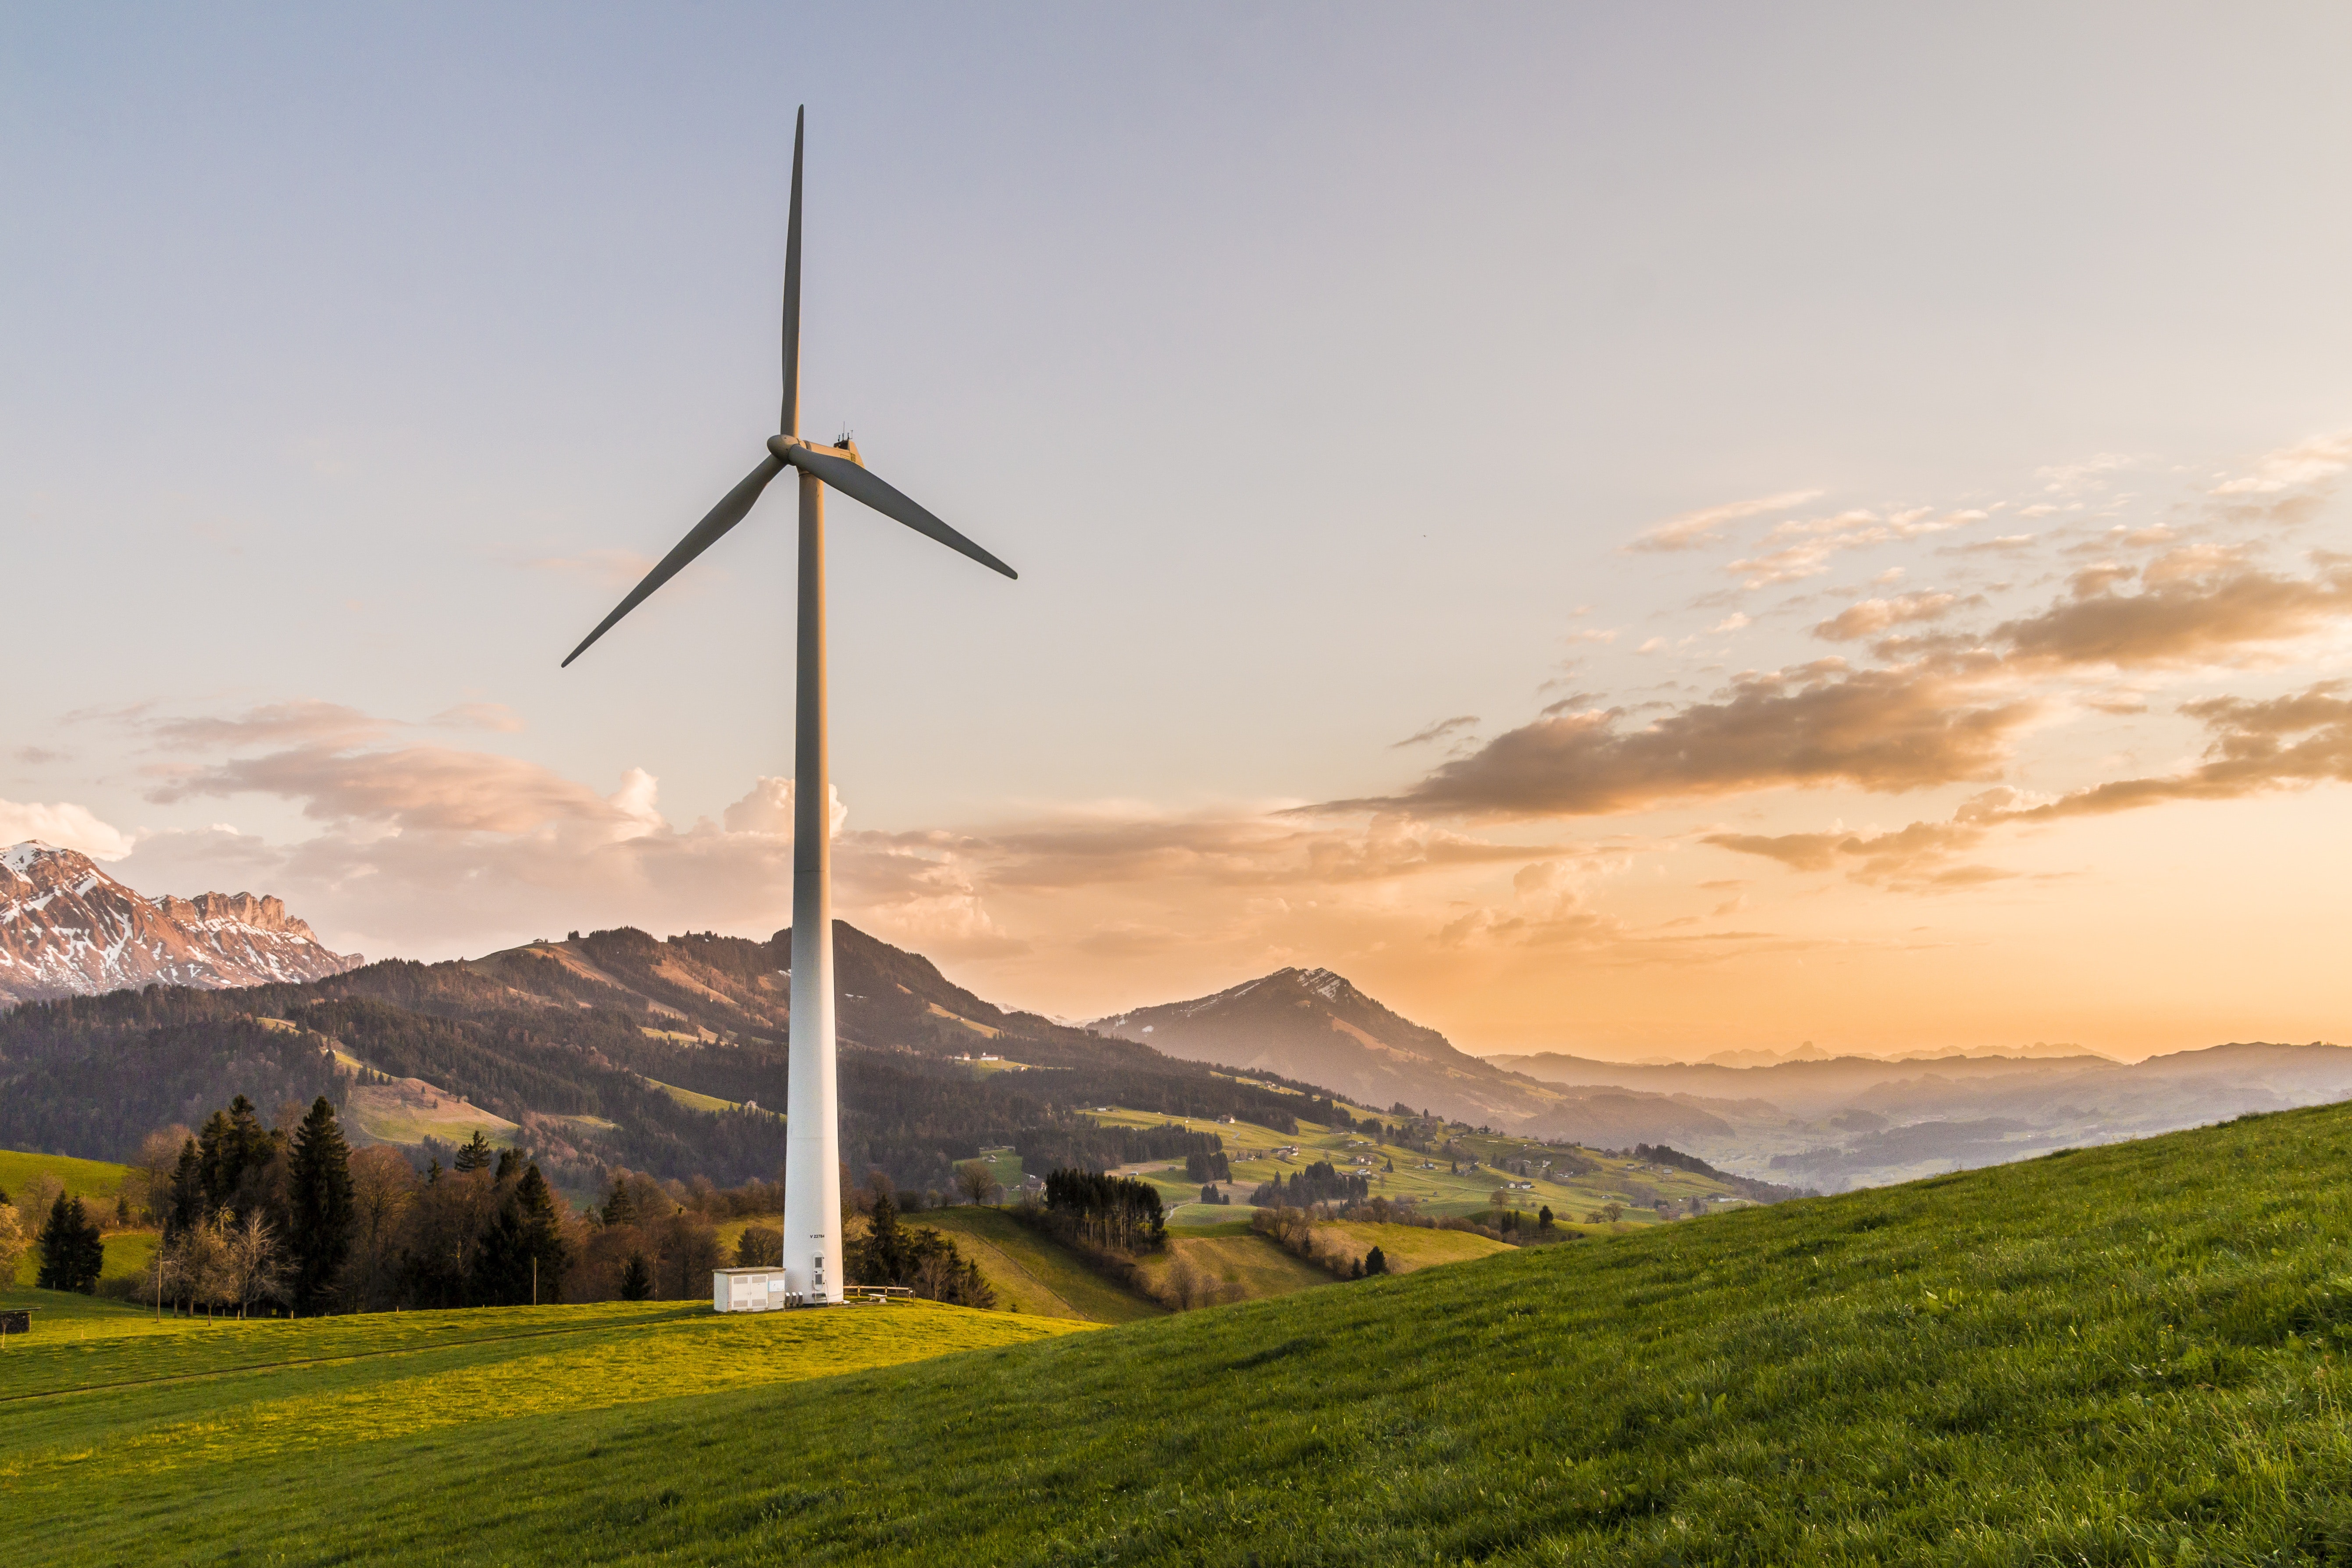 On world environment day 2019, learn more about clean, renewable sources of energy like wind energy